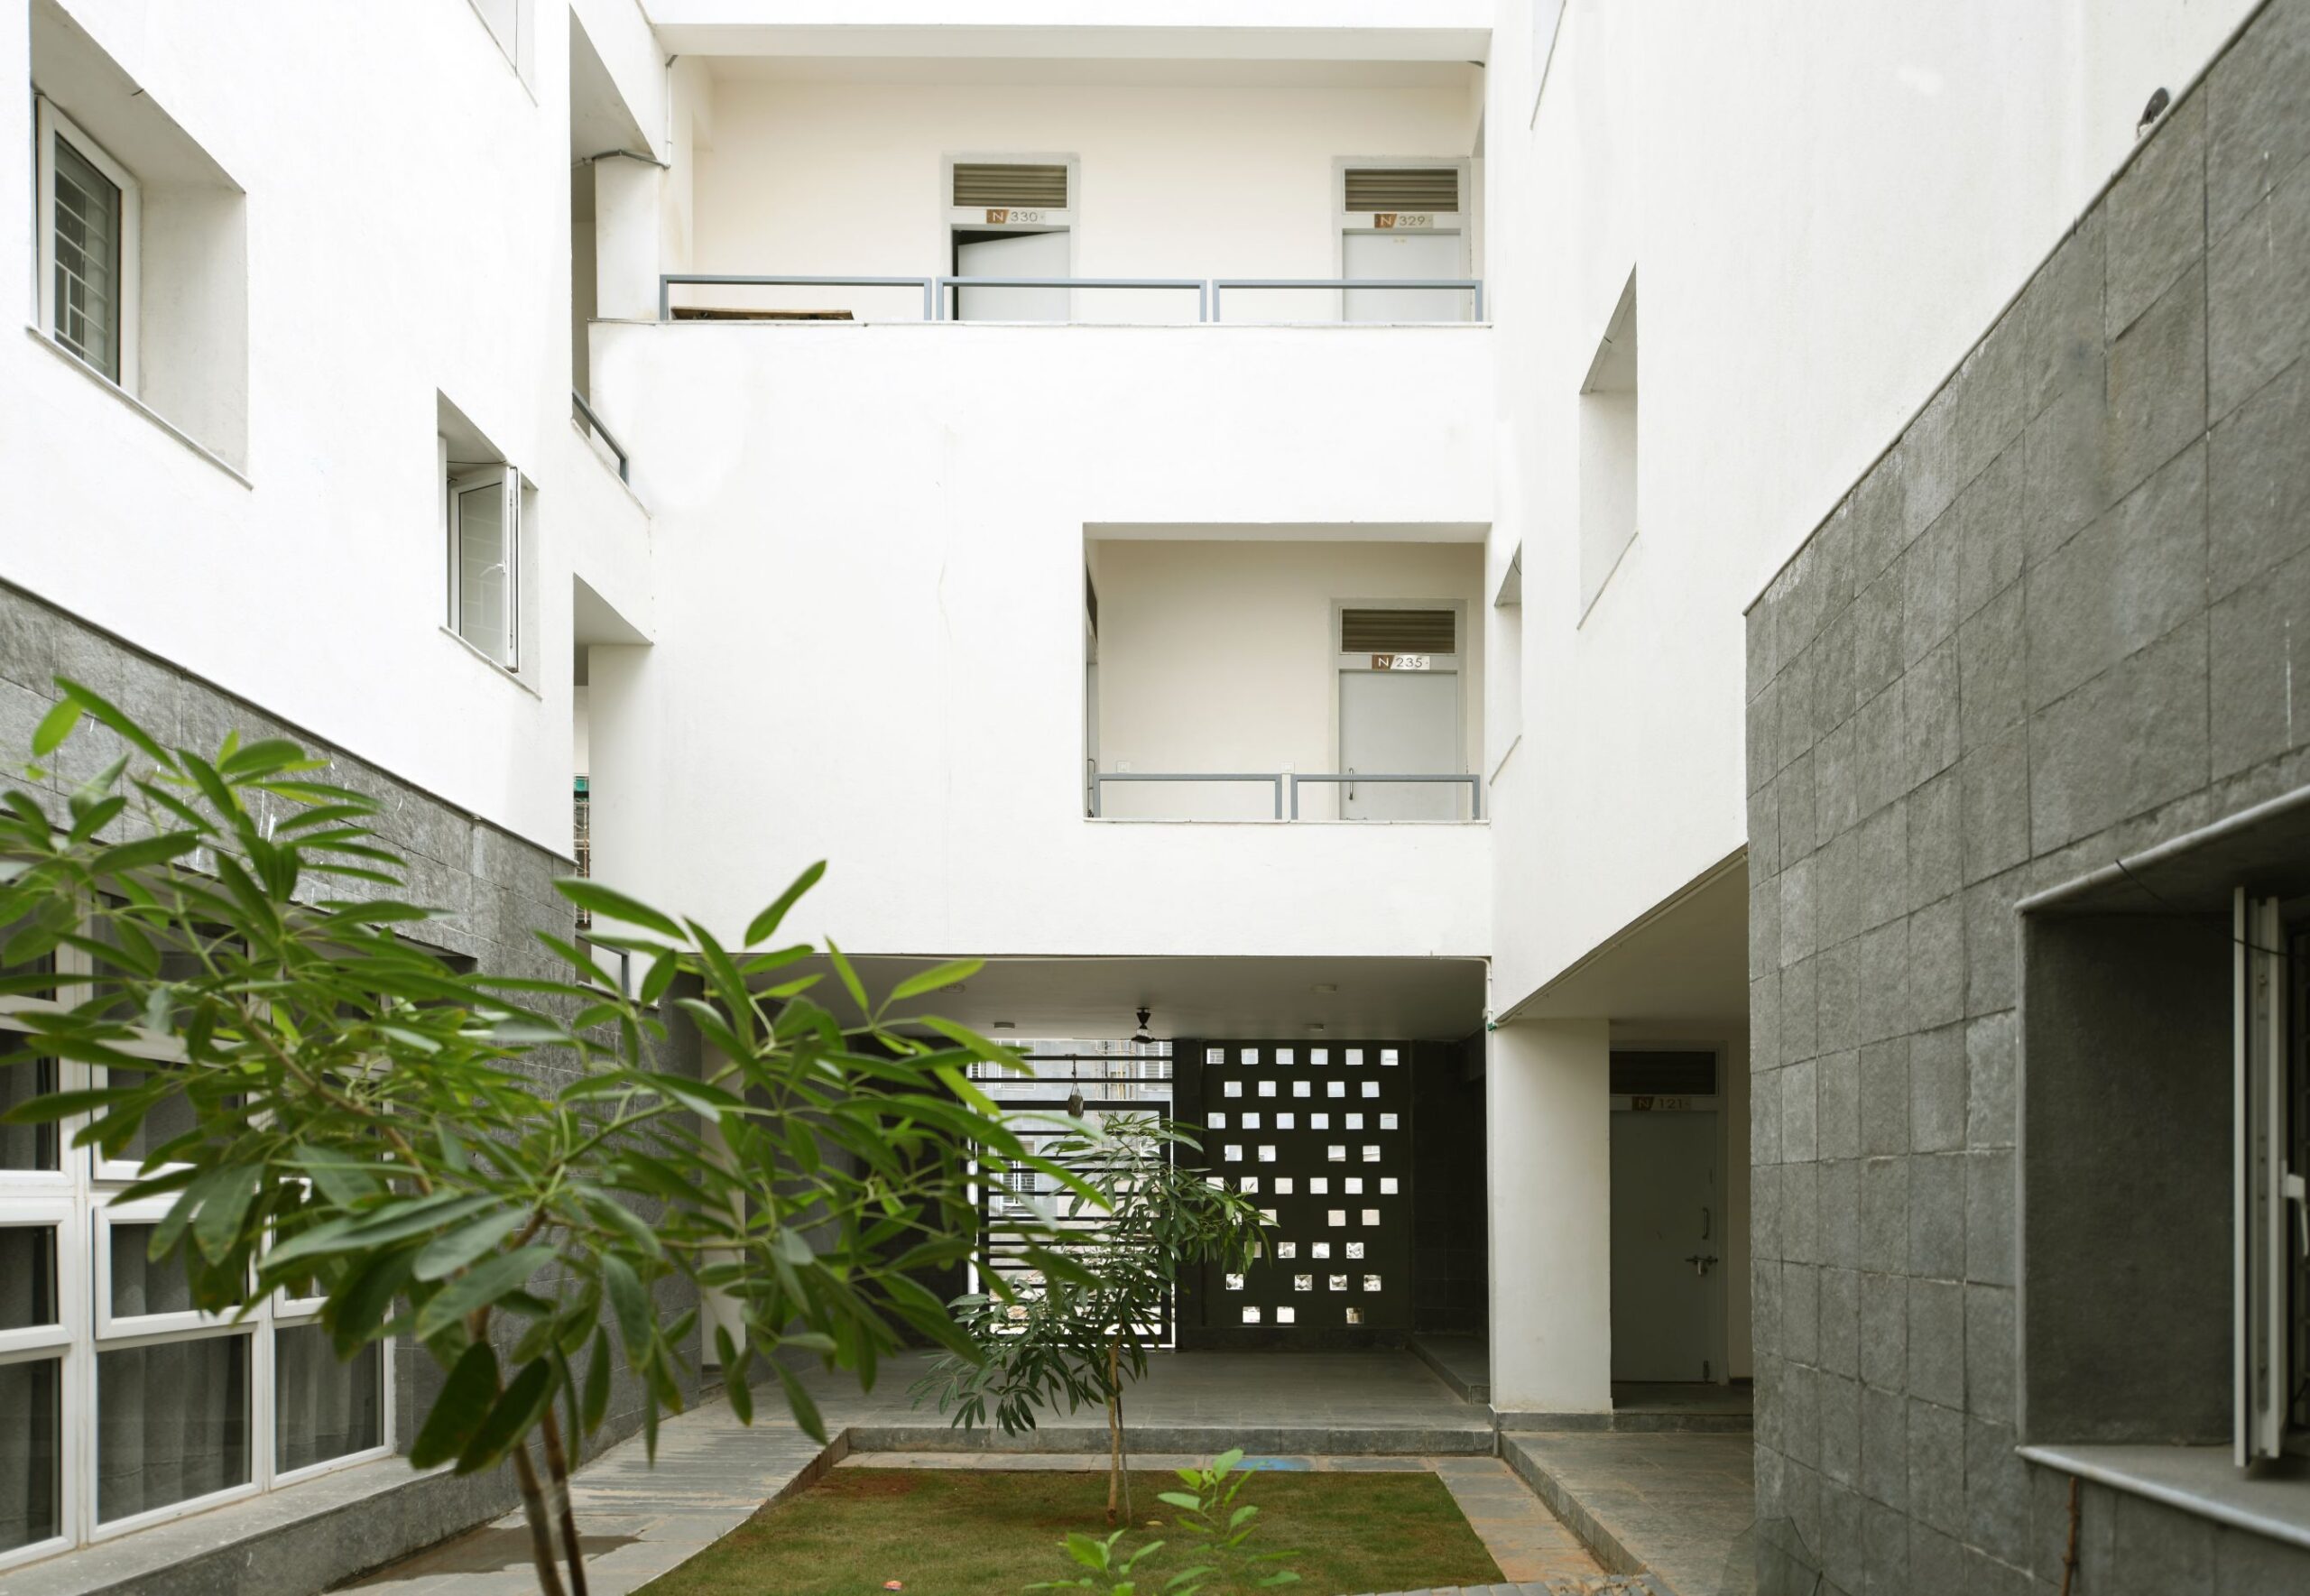 School of Planning And Architecture Student Housing, Vijayawada, by Mobile Offices 15